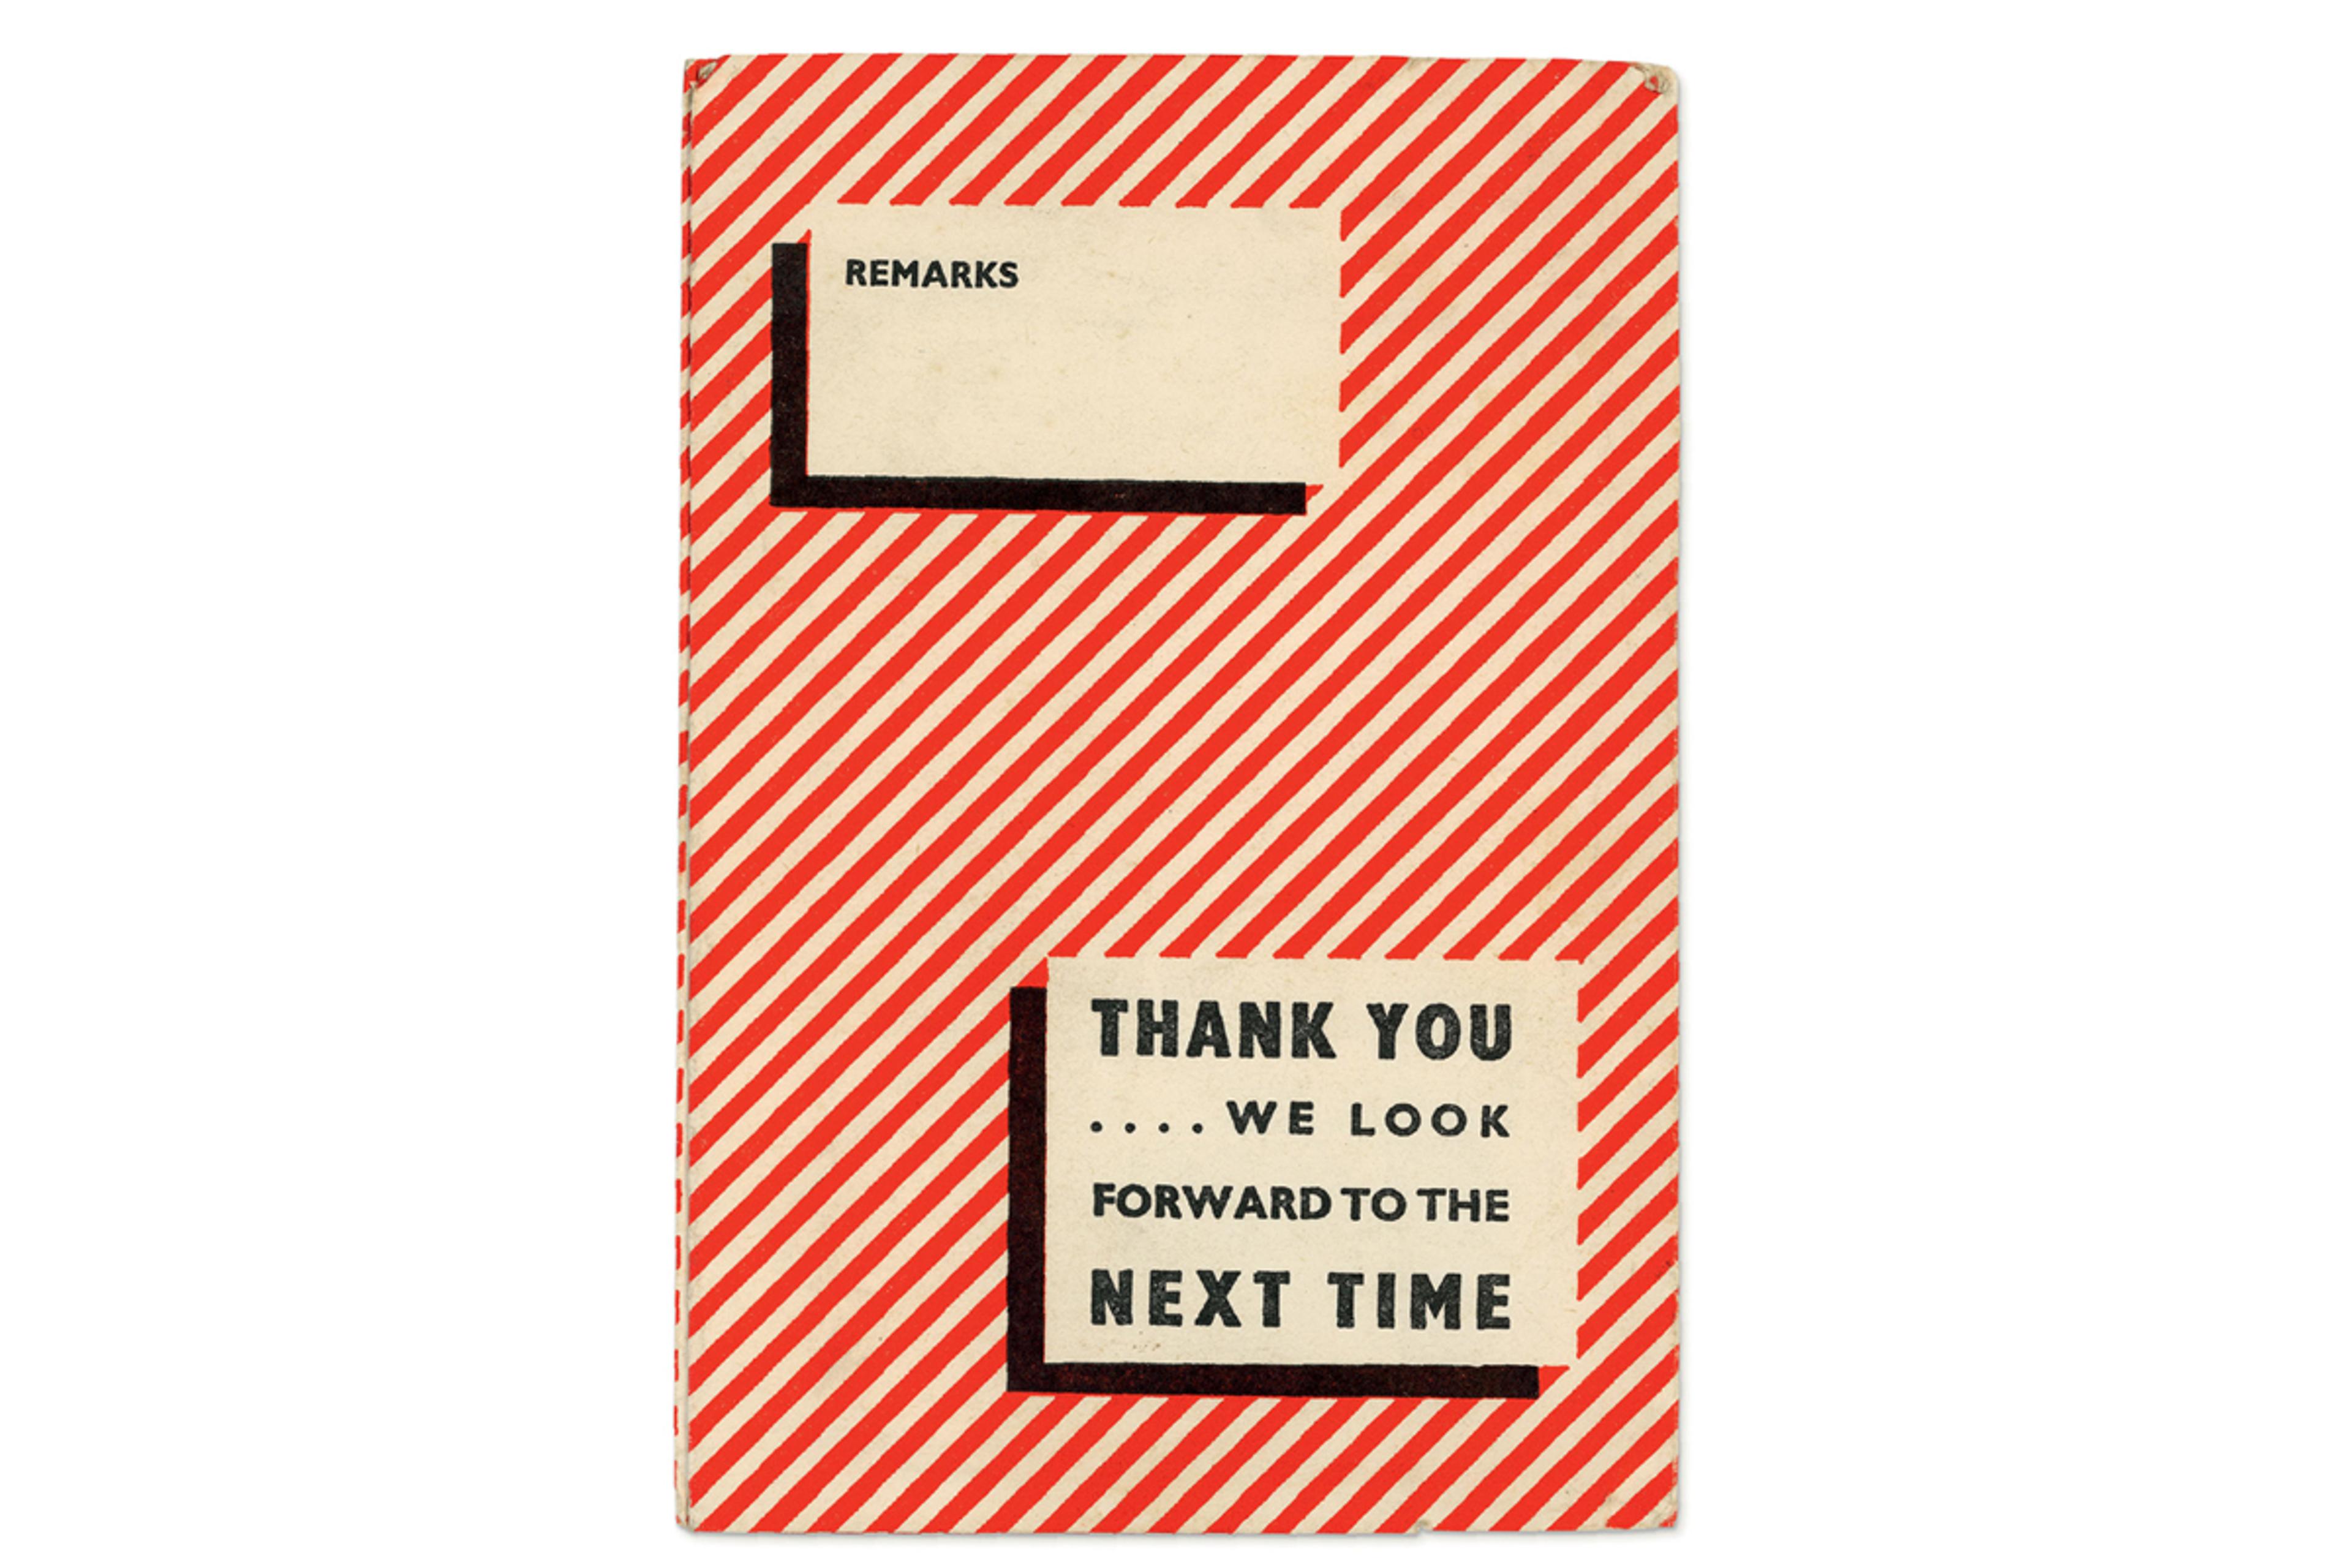 Photograph of a red and white striped photo wallet, with a white square with the text 'Remarks', and a second white square with the text 'Thank you .... we look forward to the next time'. 